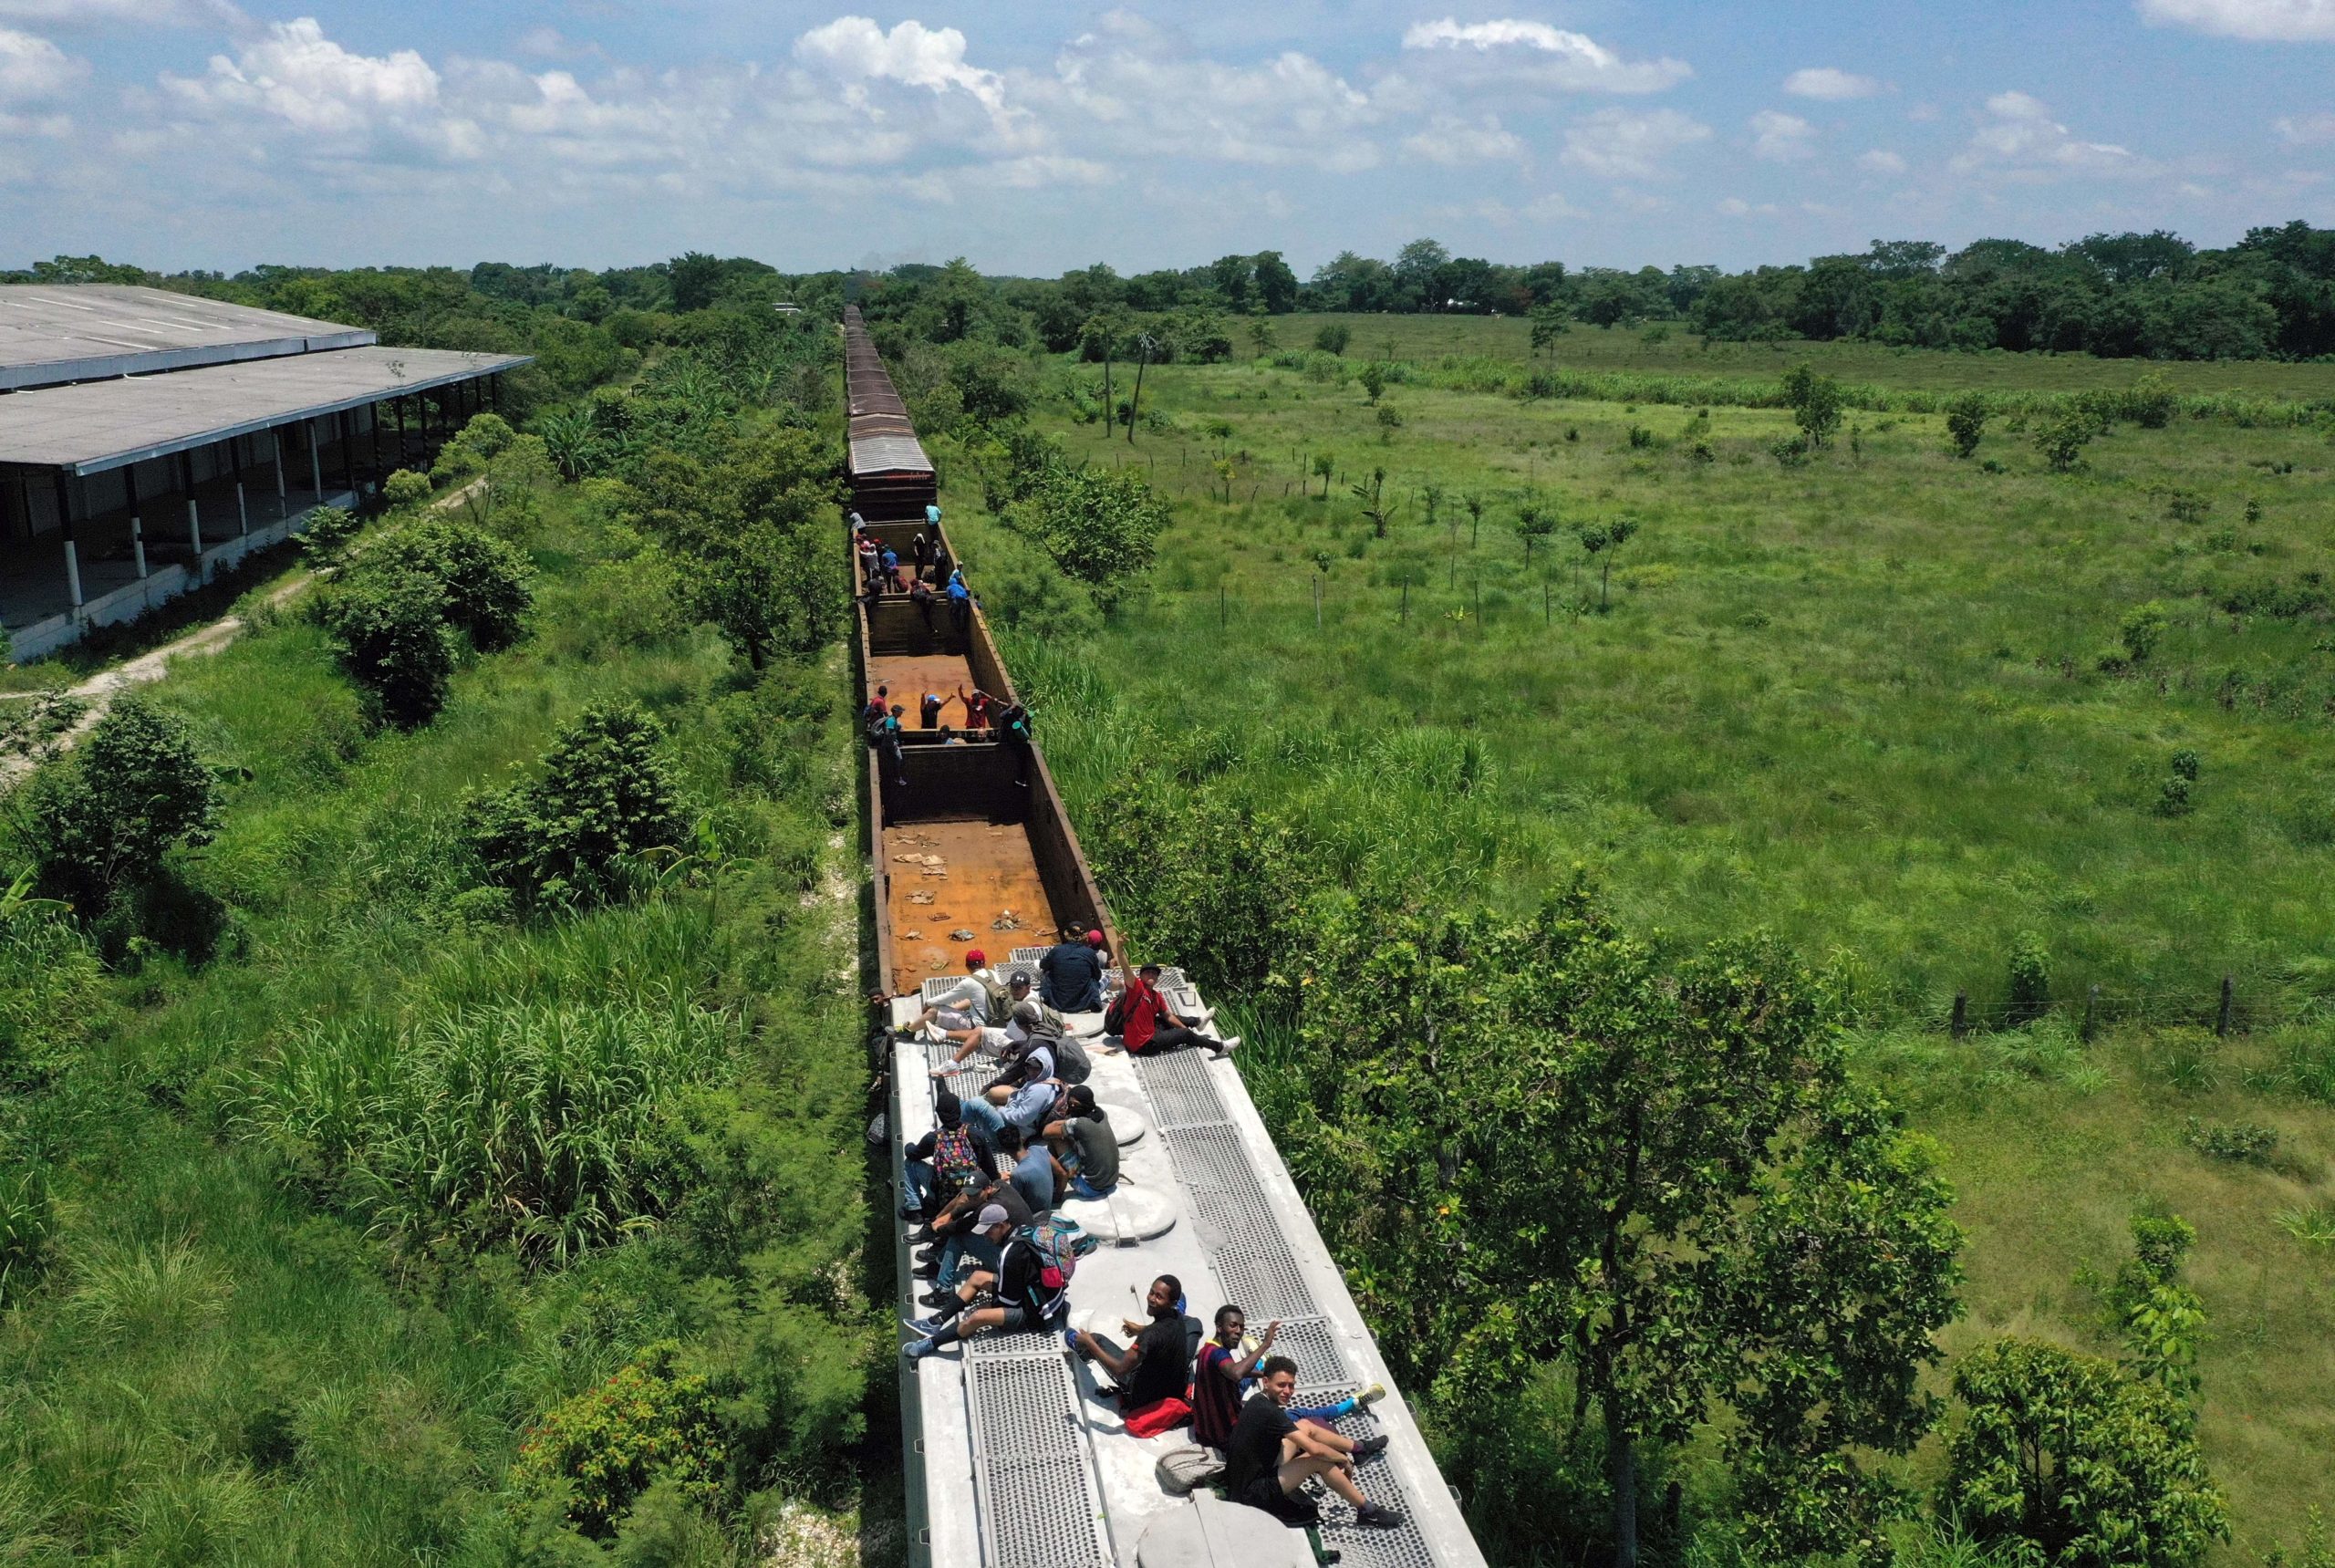 TOPSHOT - Aerial view of migrants on a train known as "The Beast" in Palenque, Chiapas state, Mexico, on July 25, 2019. (Photo credit should read ALFREDO ESTRELLA/AFP via Getty Images)